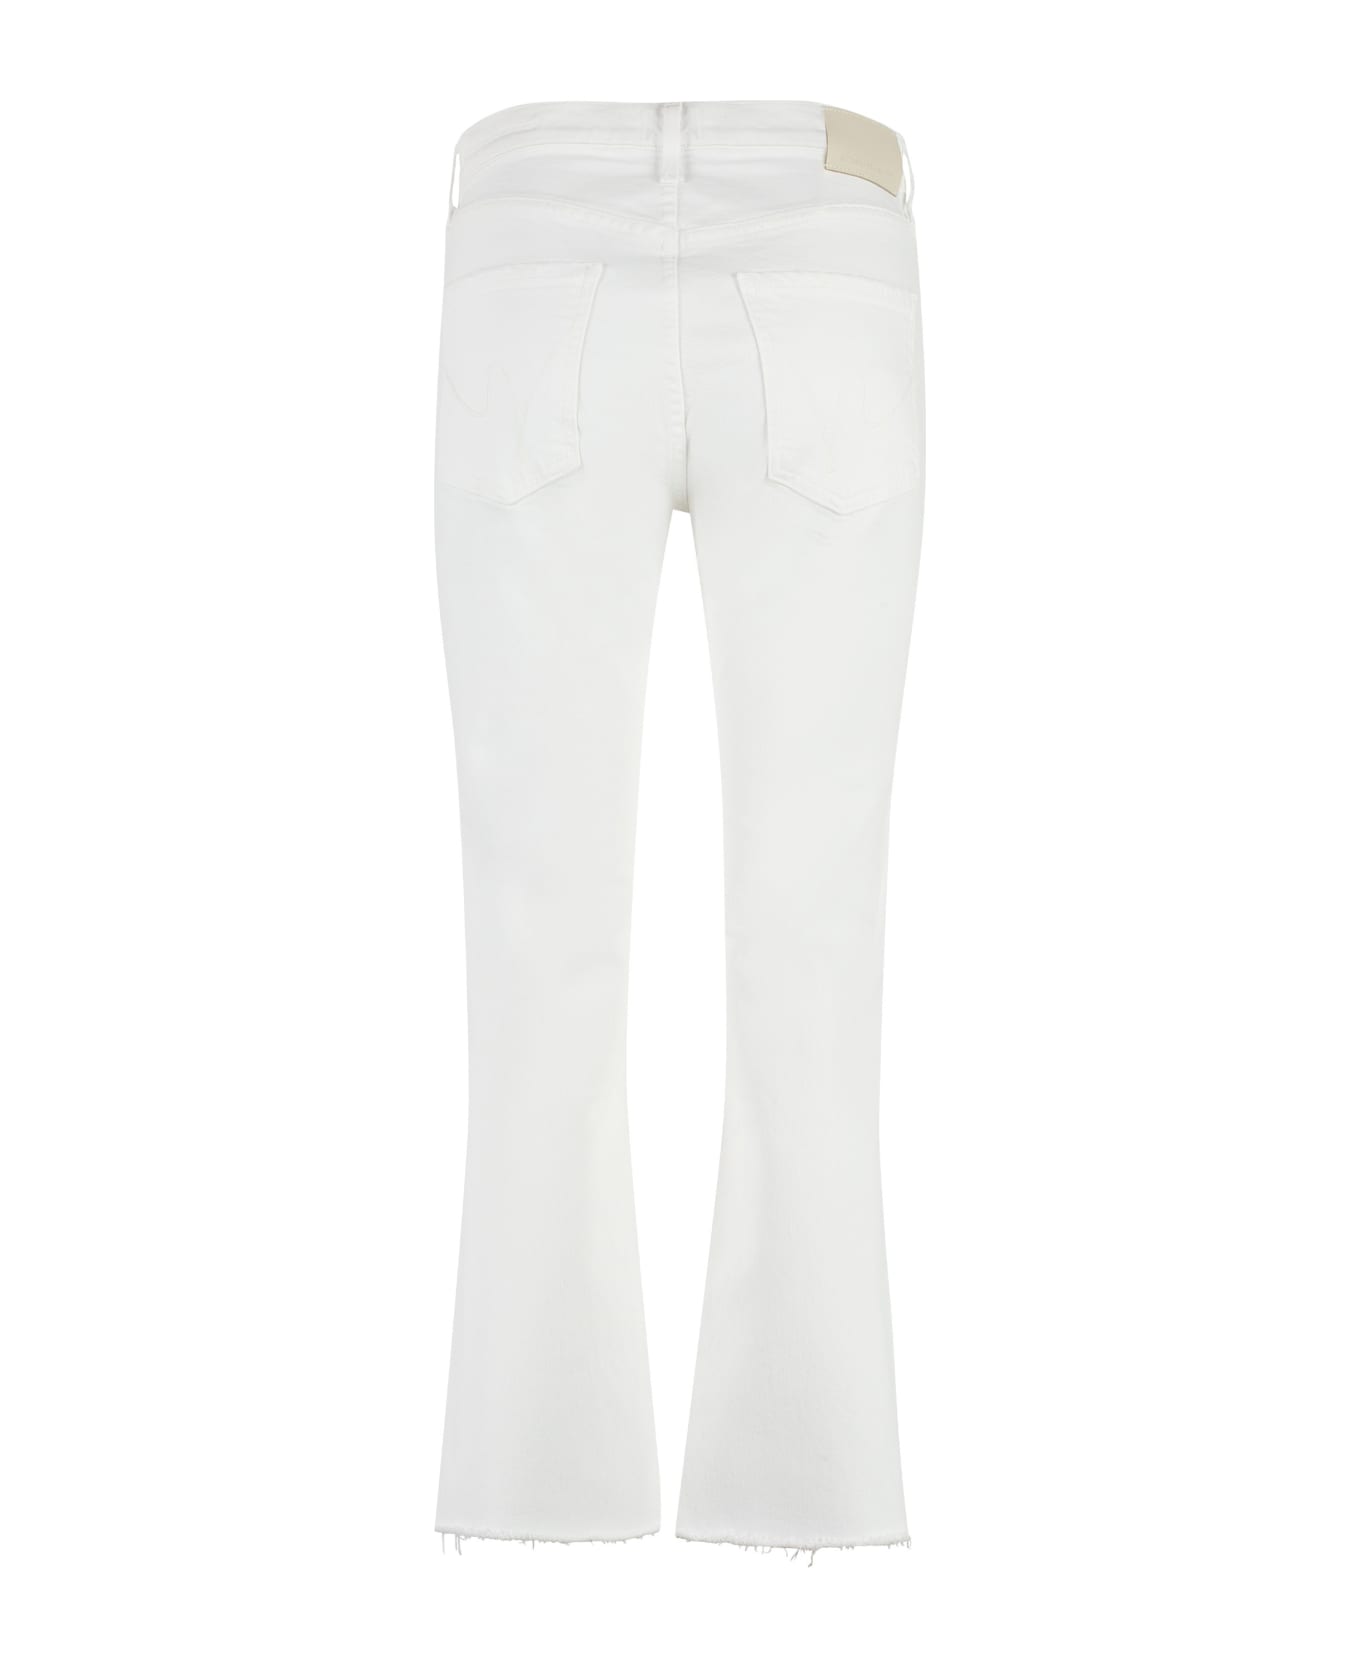 Citizens of Humanity Cropped Jeans - White デニム